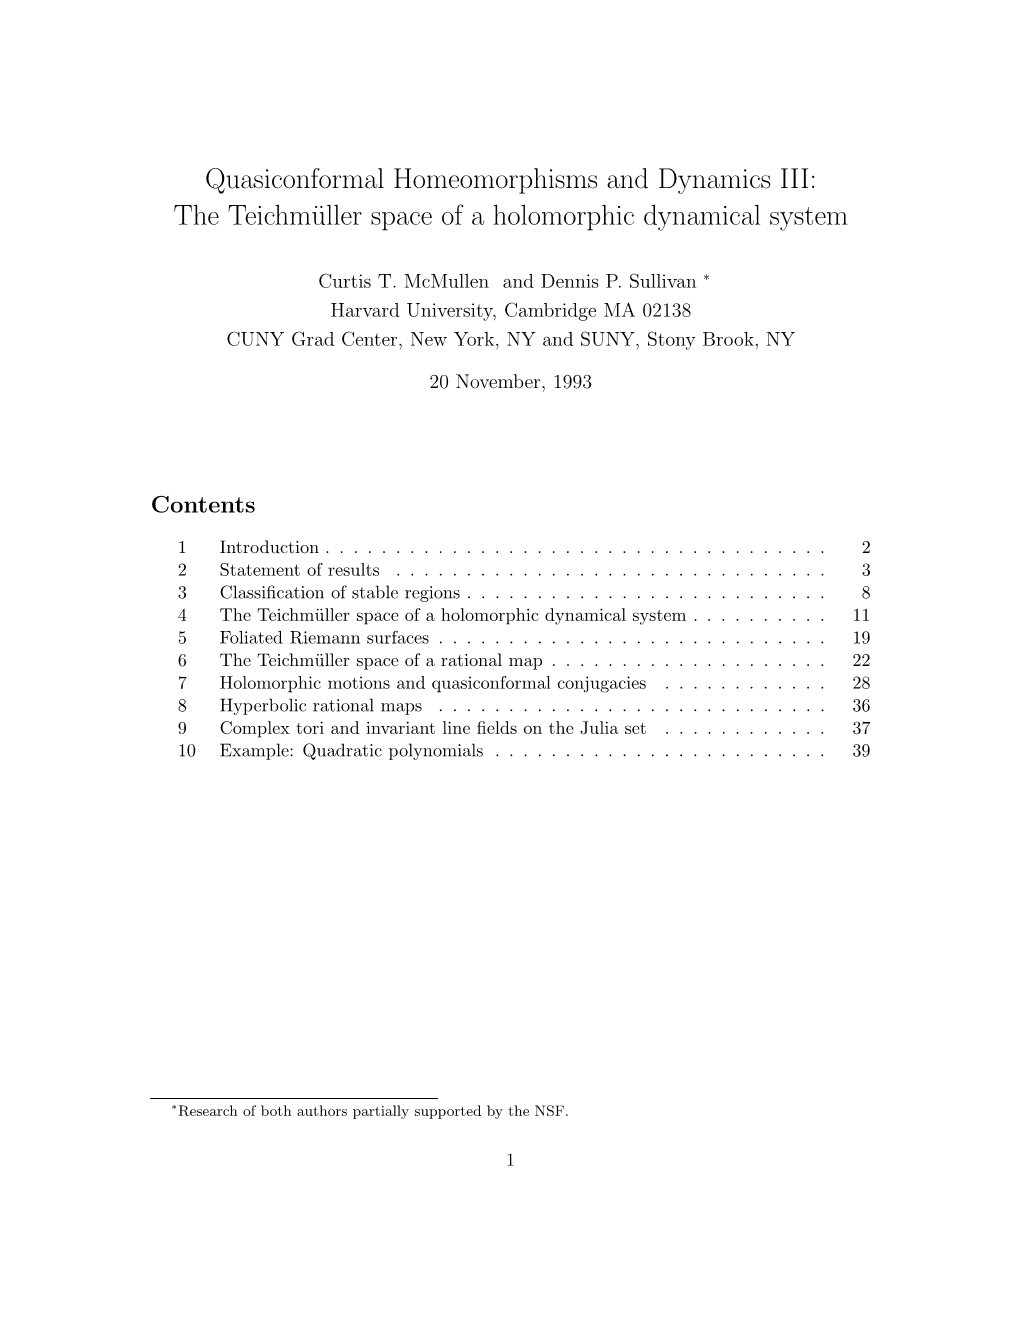 Quasiconformal Homeomorphisms and Dynamics III: the Teichmüller Space of a Holomorphic Dynamical System